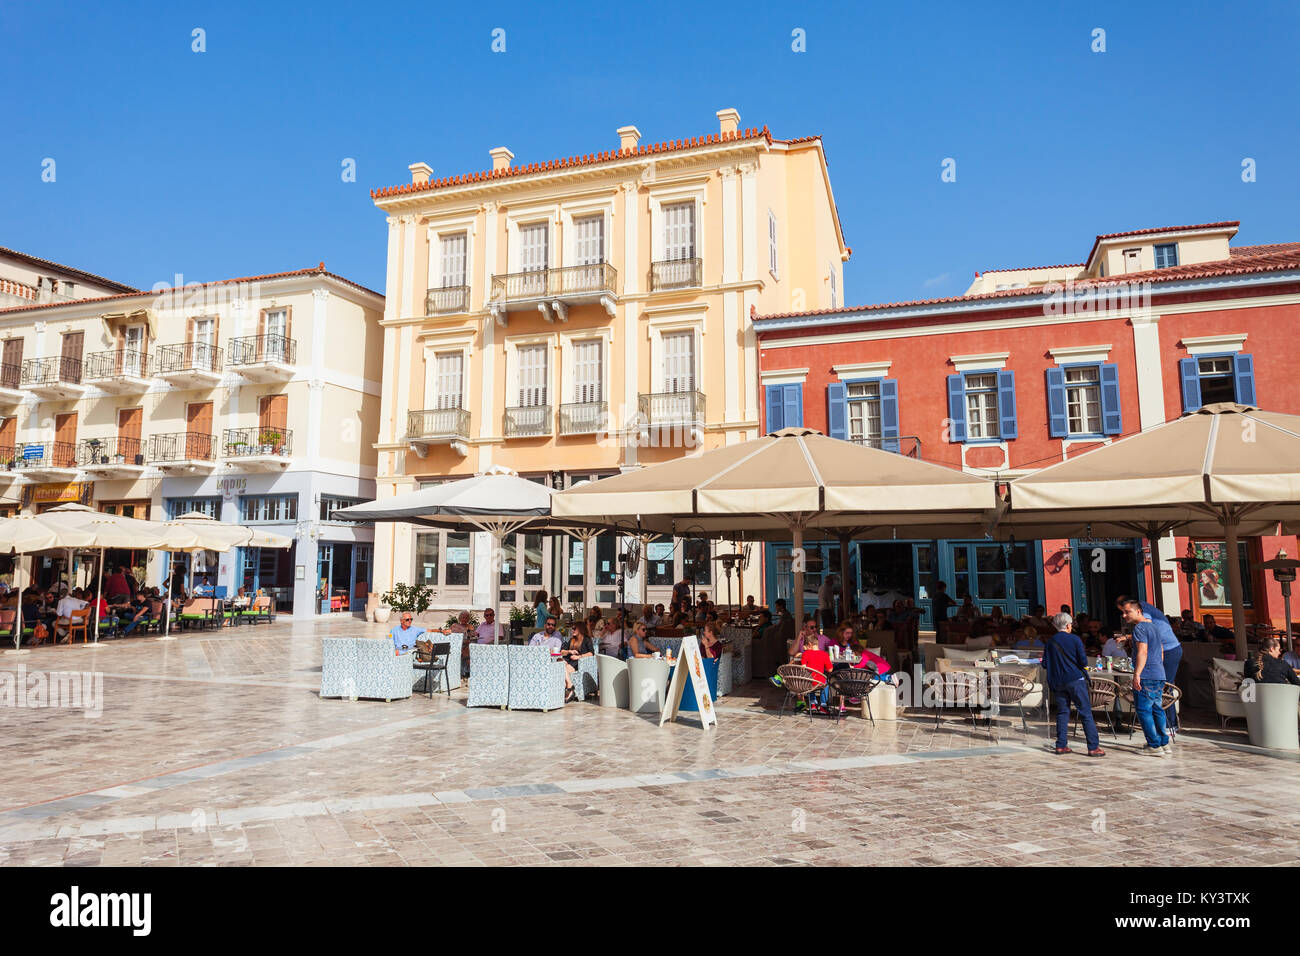 NAFPLIO, GREECE - OCTOBER 16, 2016: Syntagma or Constitution square is ...